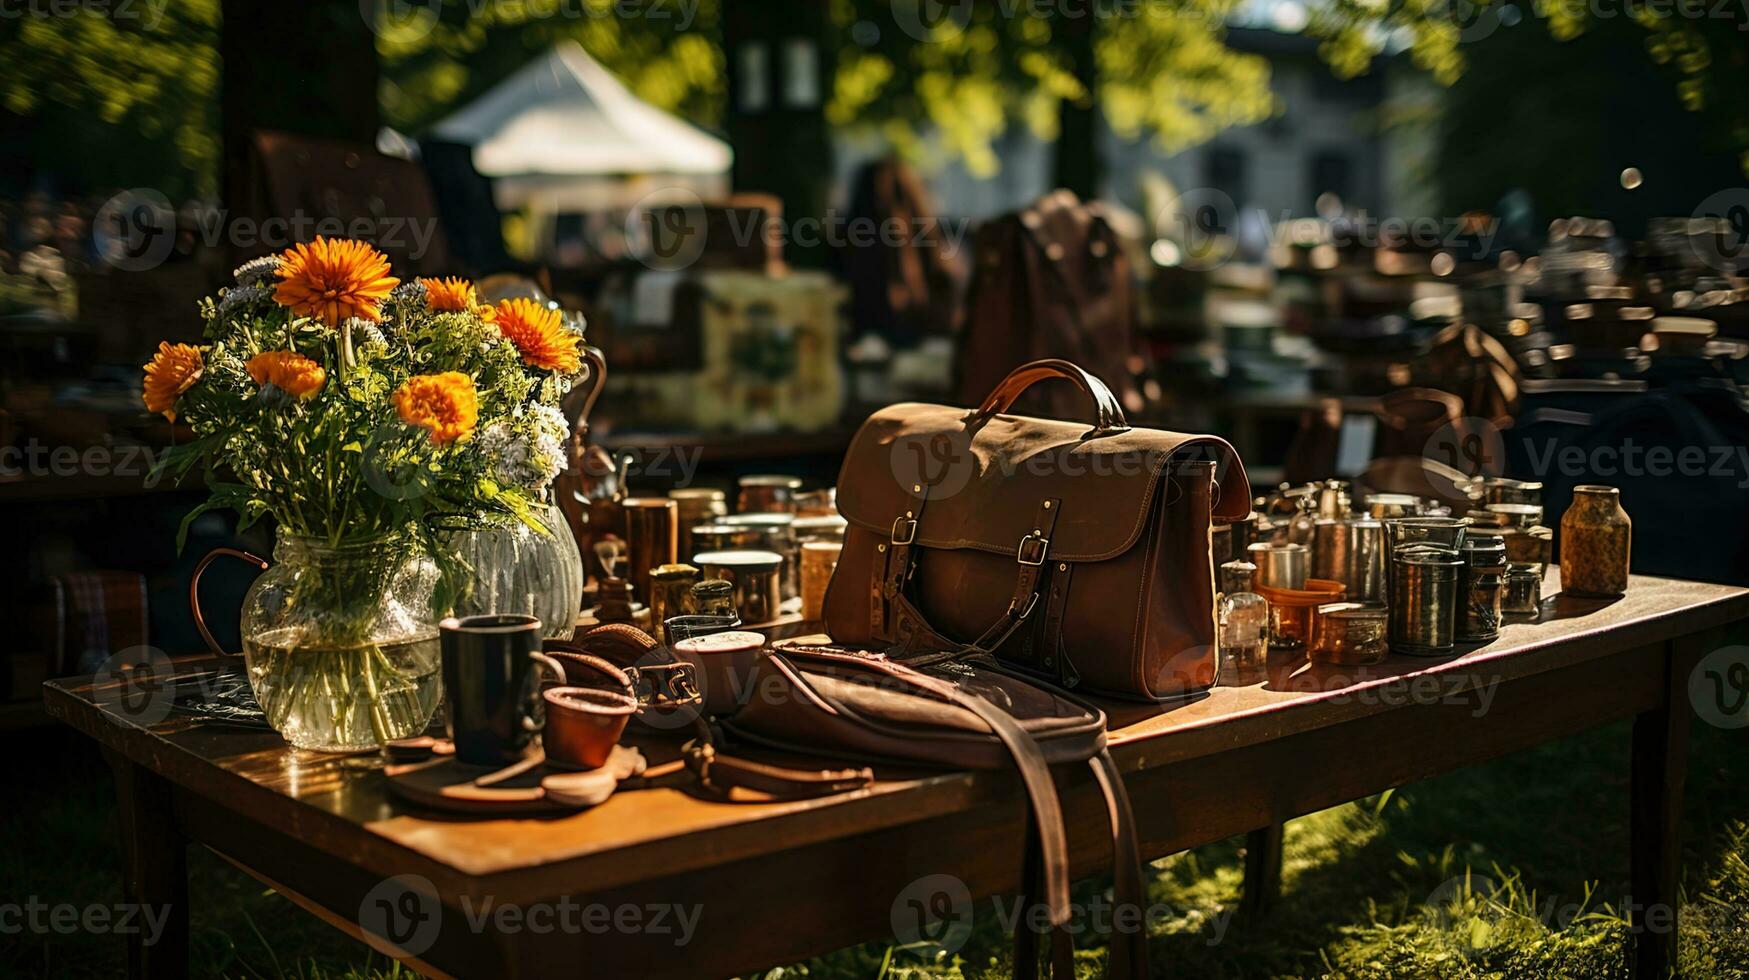 Garage Sale, Vintage and Used Goods on Display at an Afternoon Flea Market on the Greensward - A Treasure Hunt for Antique and Retro Collectibles, Ai generative photo